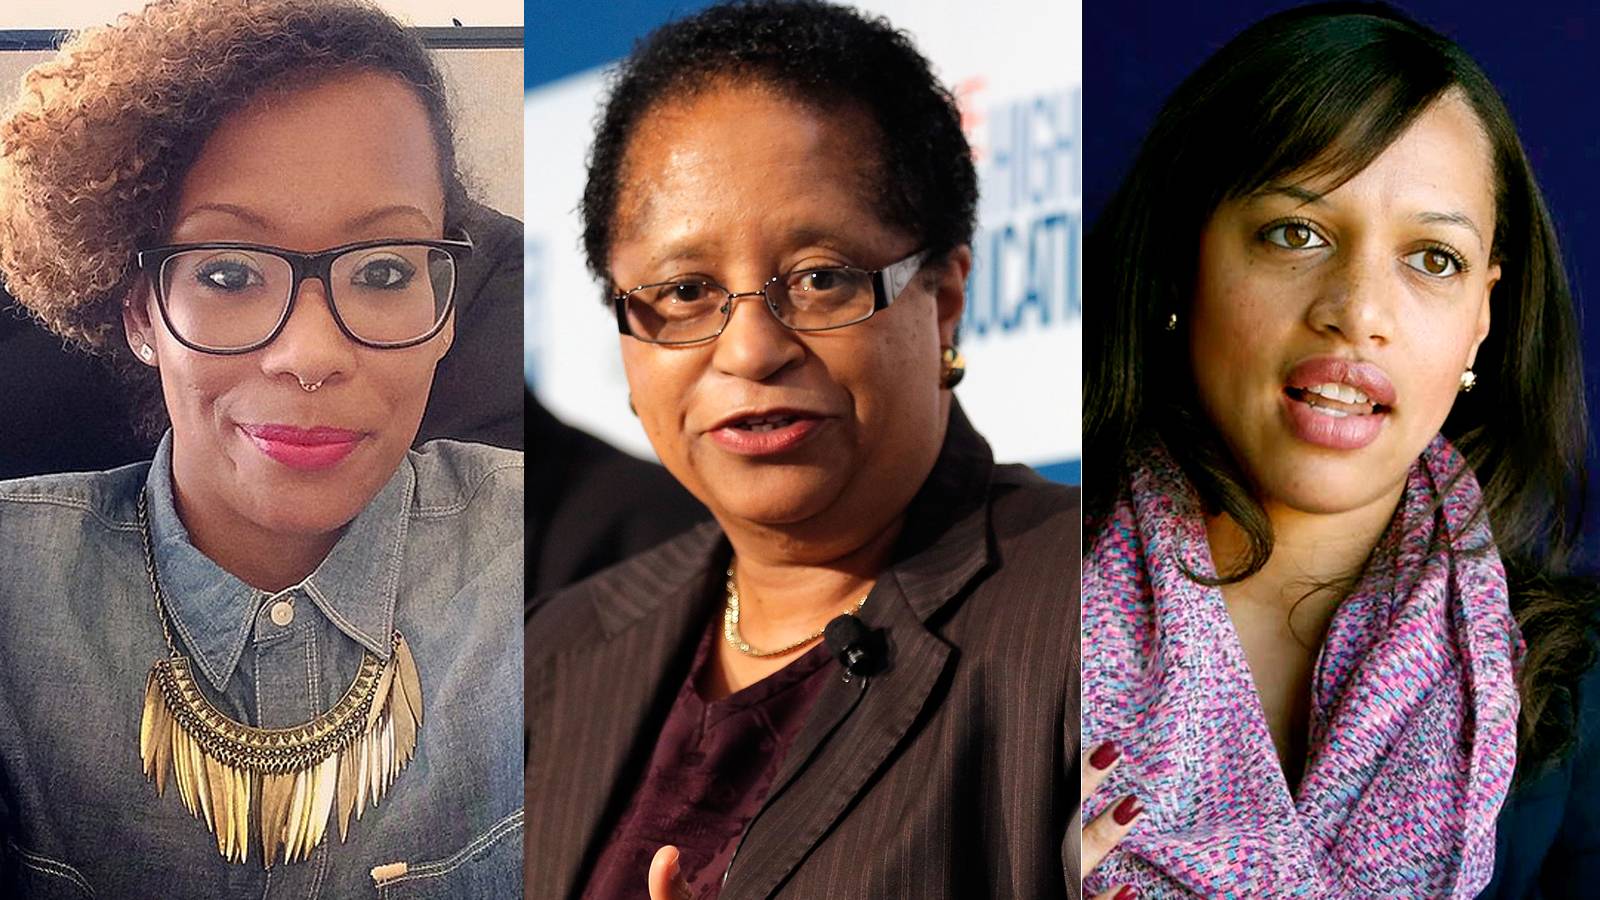 Techie Ladies - In honor of Women’s History Month, we’re featuring 10 remarkable individuals who are not only blazing innovative paths throughout the field of technology, but also making a point of ushering in younger generations to create a more diverse and prosperous industry.&nbsp;—&nbsp;Patrice Peck(Photos from Left: Jenna Wortham via Instagram, Jemal Countess/Getty Images for TIME, San Jose Mercury News/ MCT /Landov)